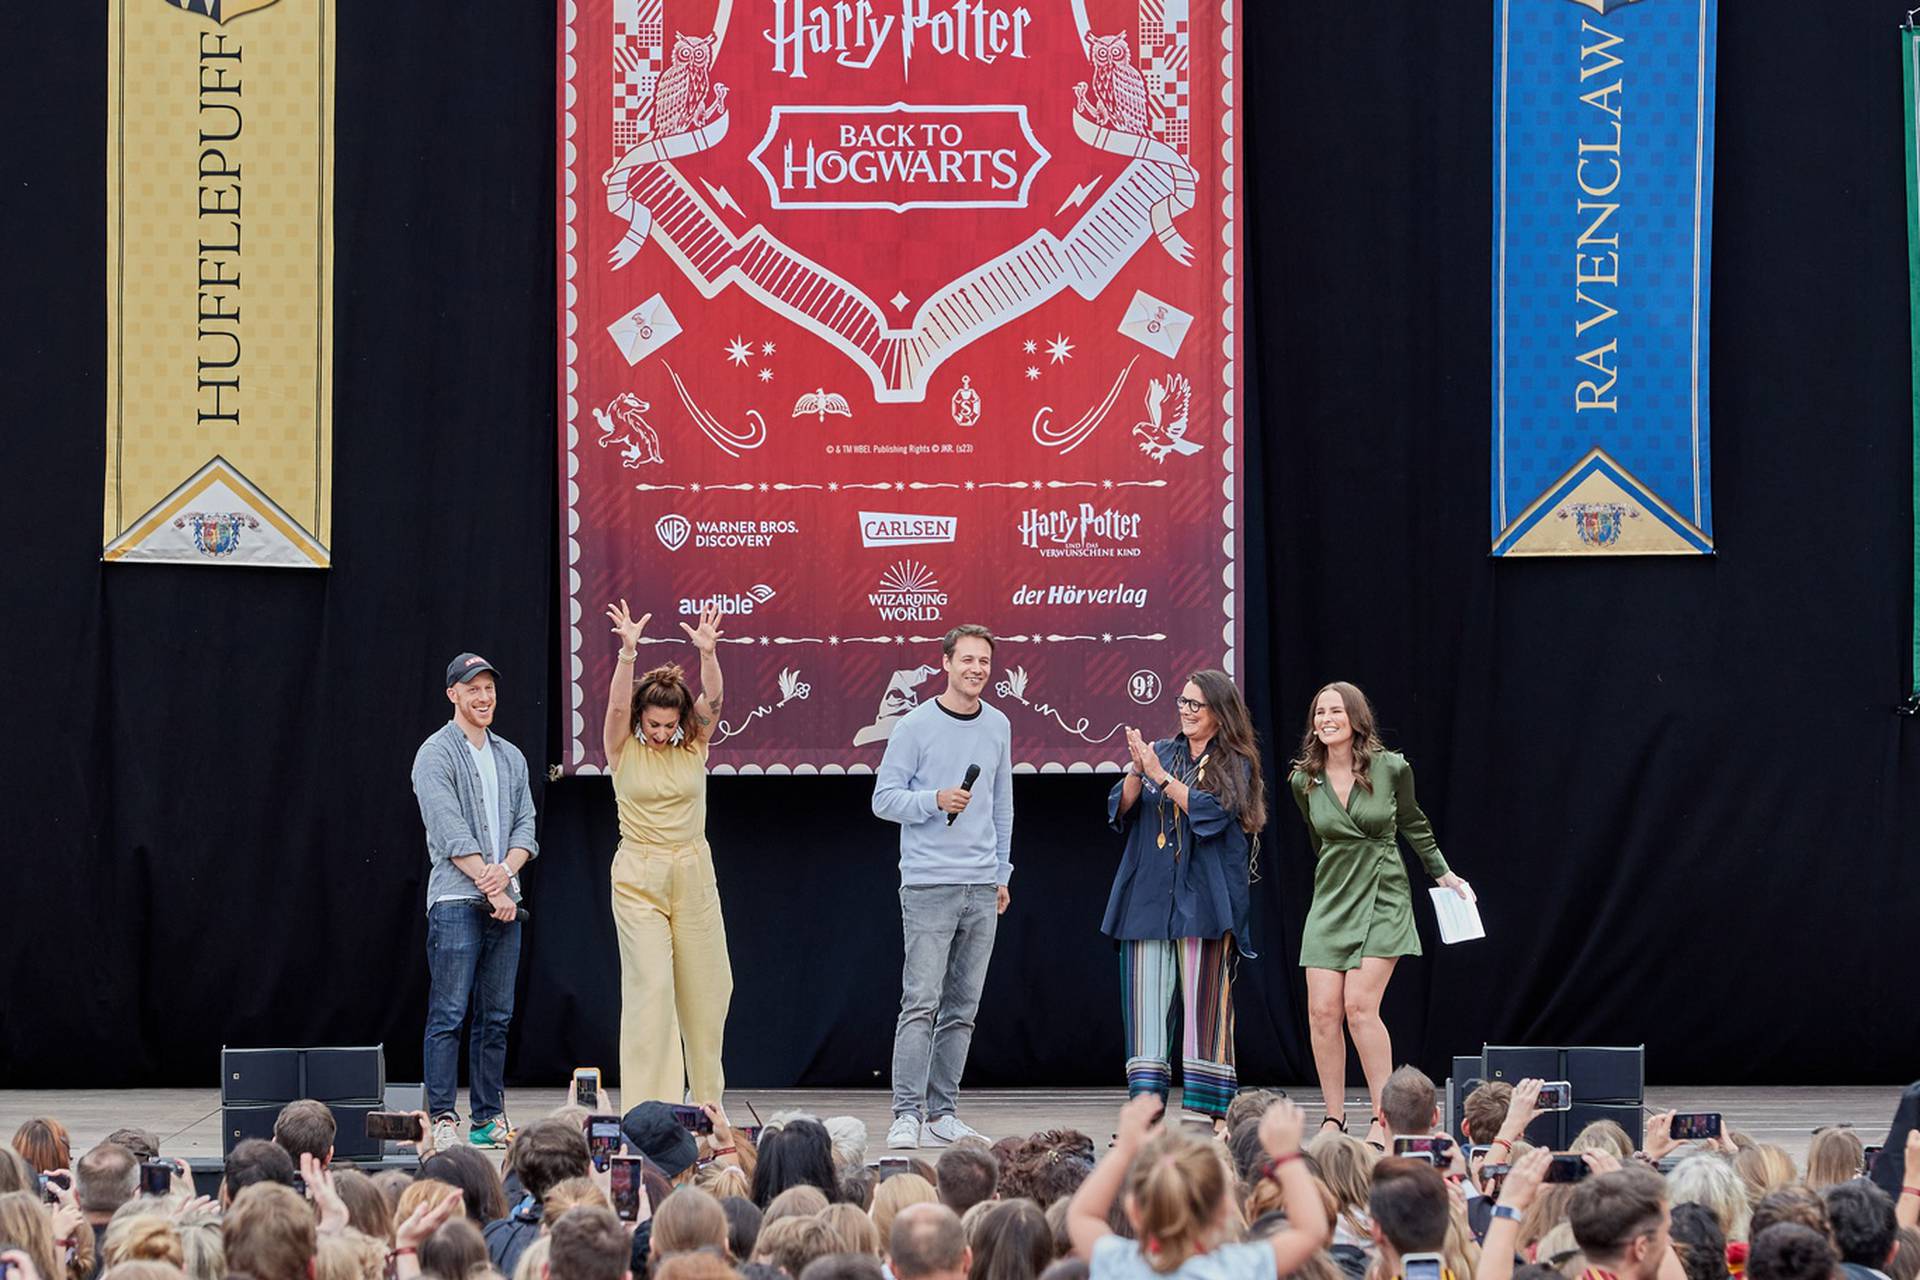 Harry Potter celebrates 25th anniversary with world record attempt